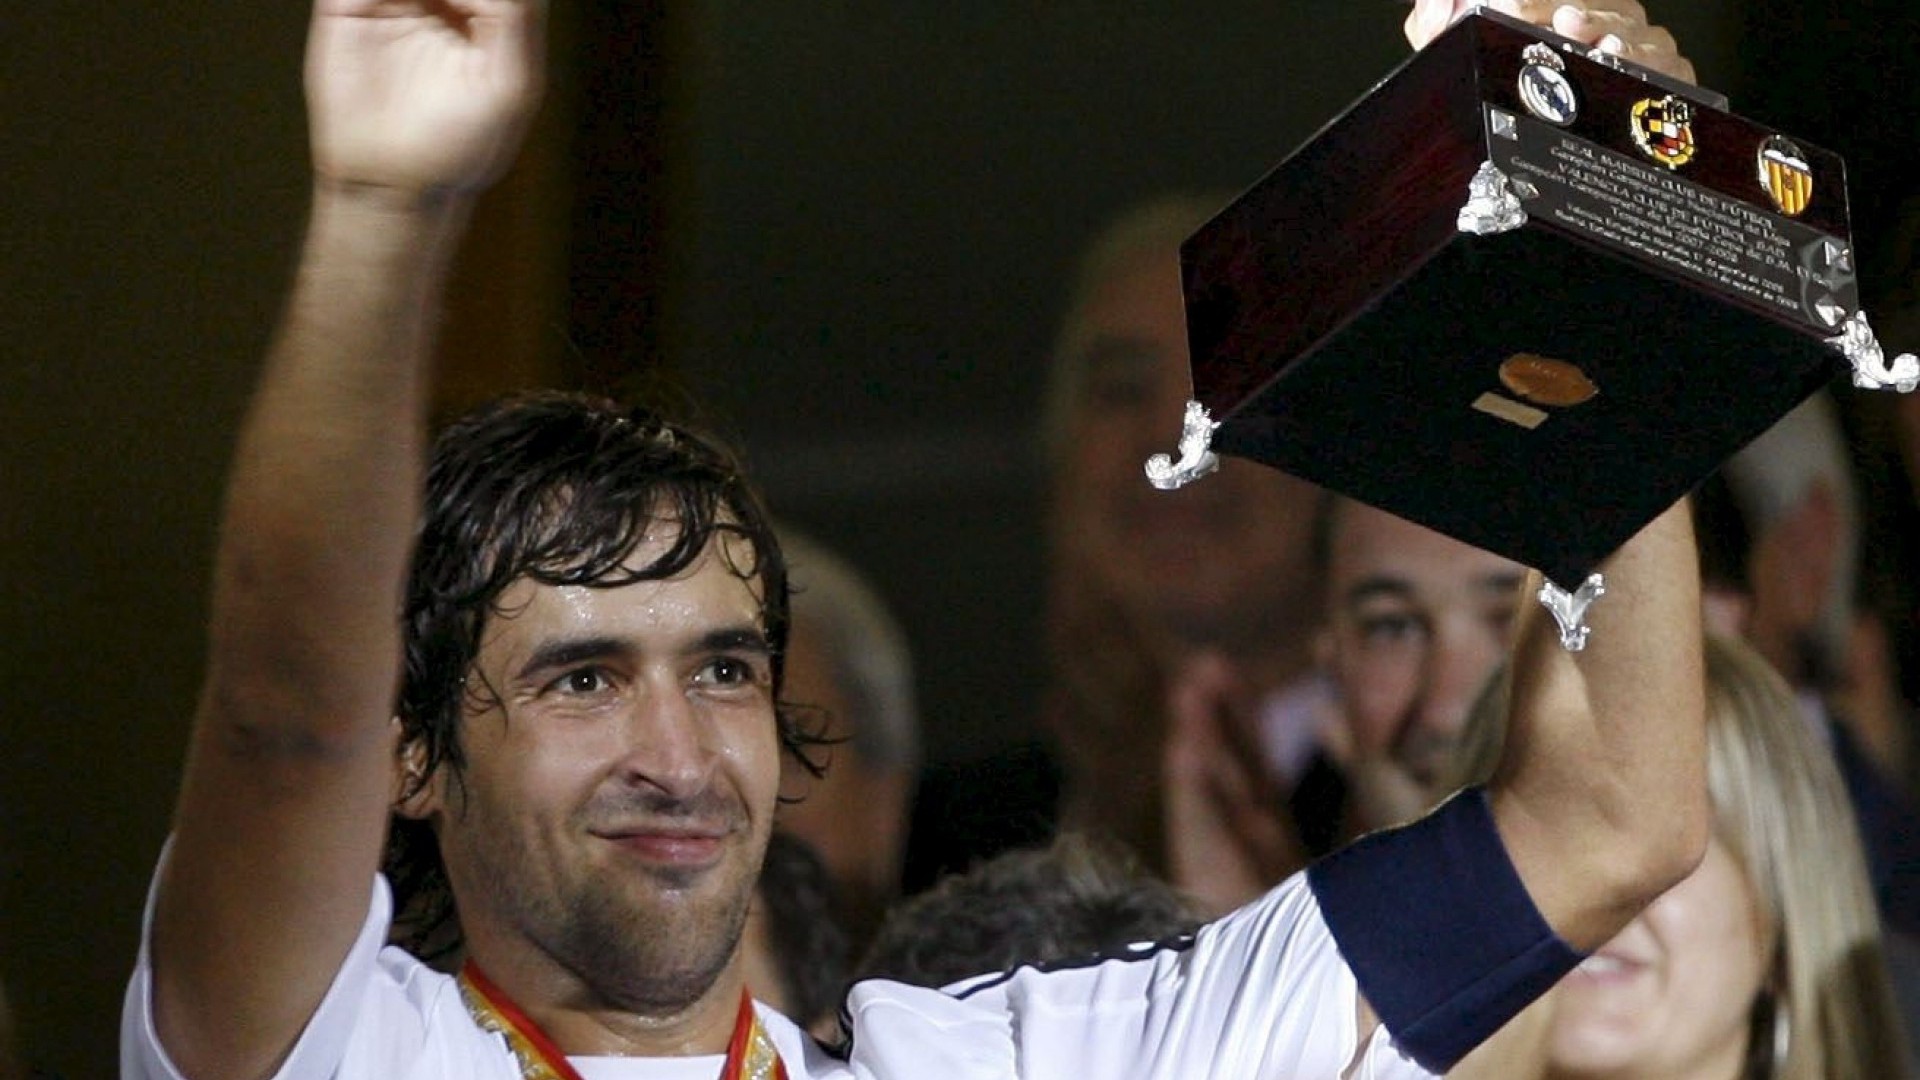 Sports Soccer Legend Spain Madrid Real Madrid Raul - Spanish Super Cup Trophy - HD Wallpaper 